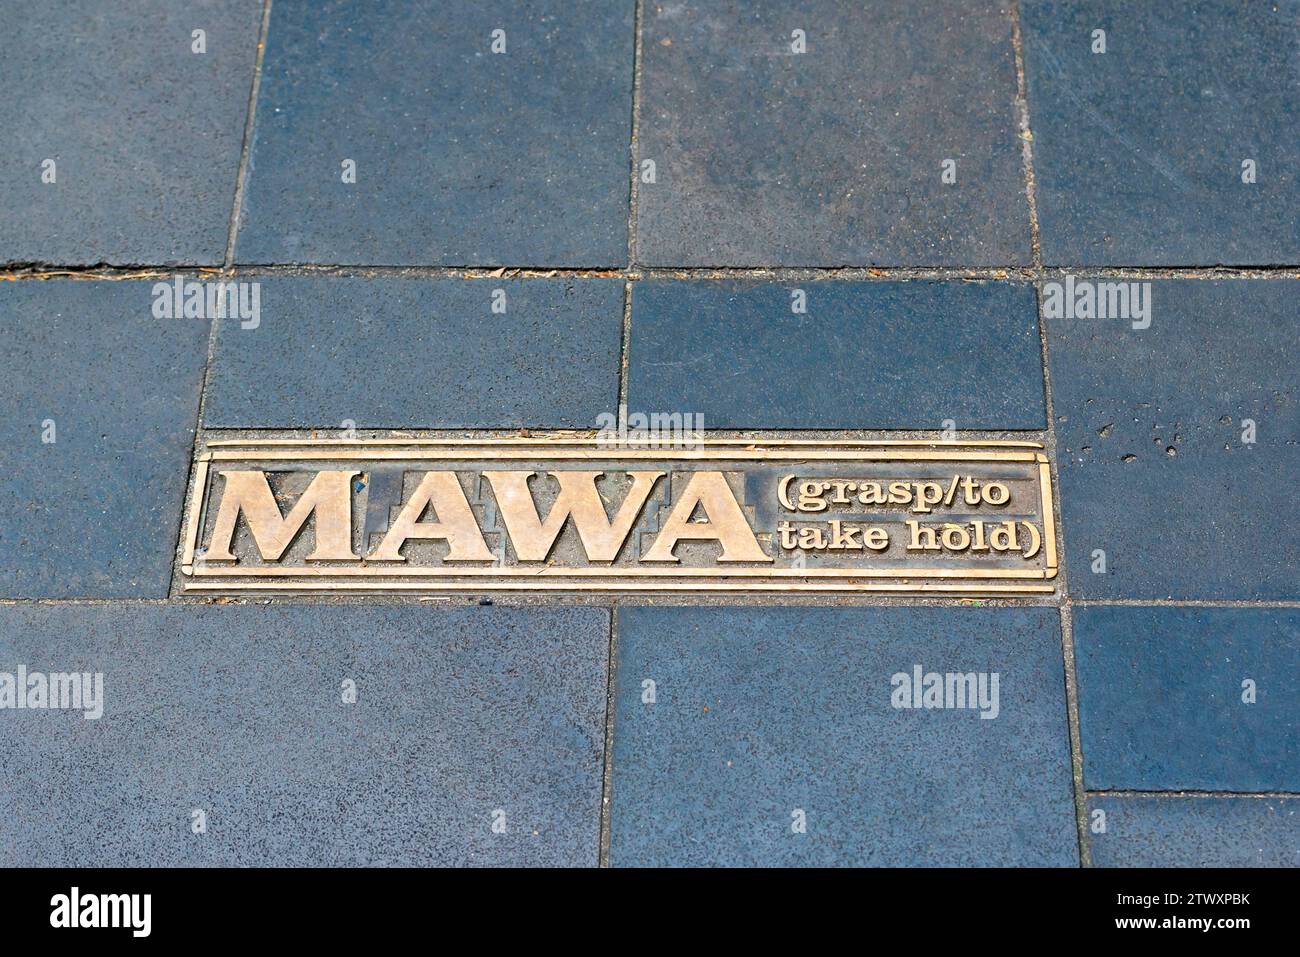 Aboriginal language words on brass plates embedded in the pavement of Martin Place in Sydney, Australia Stock Photo